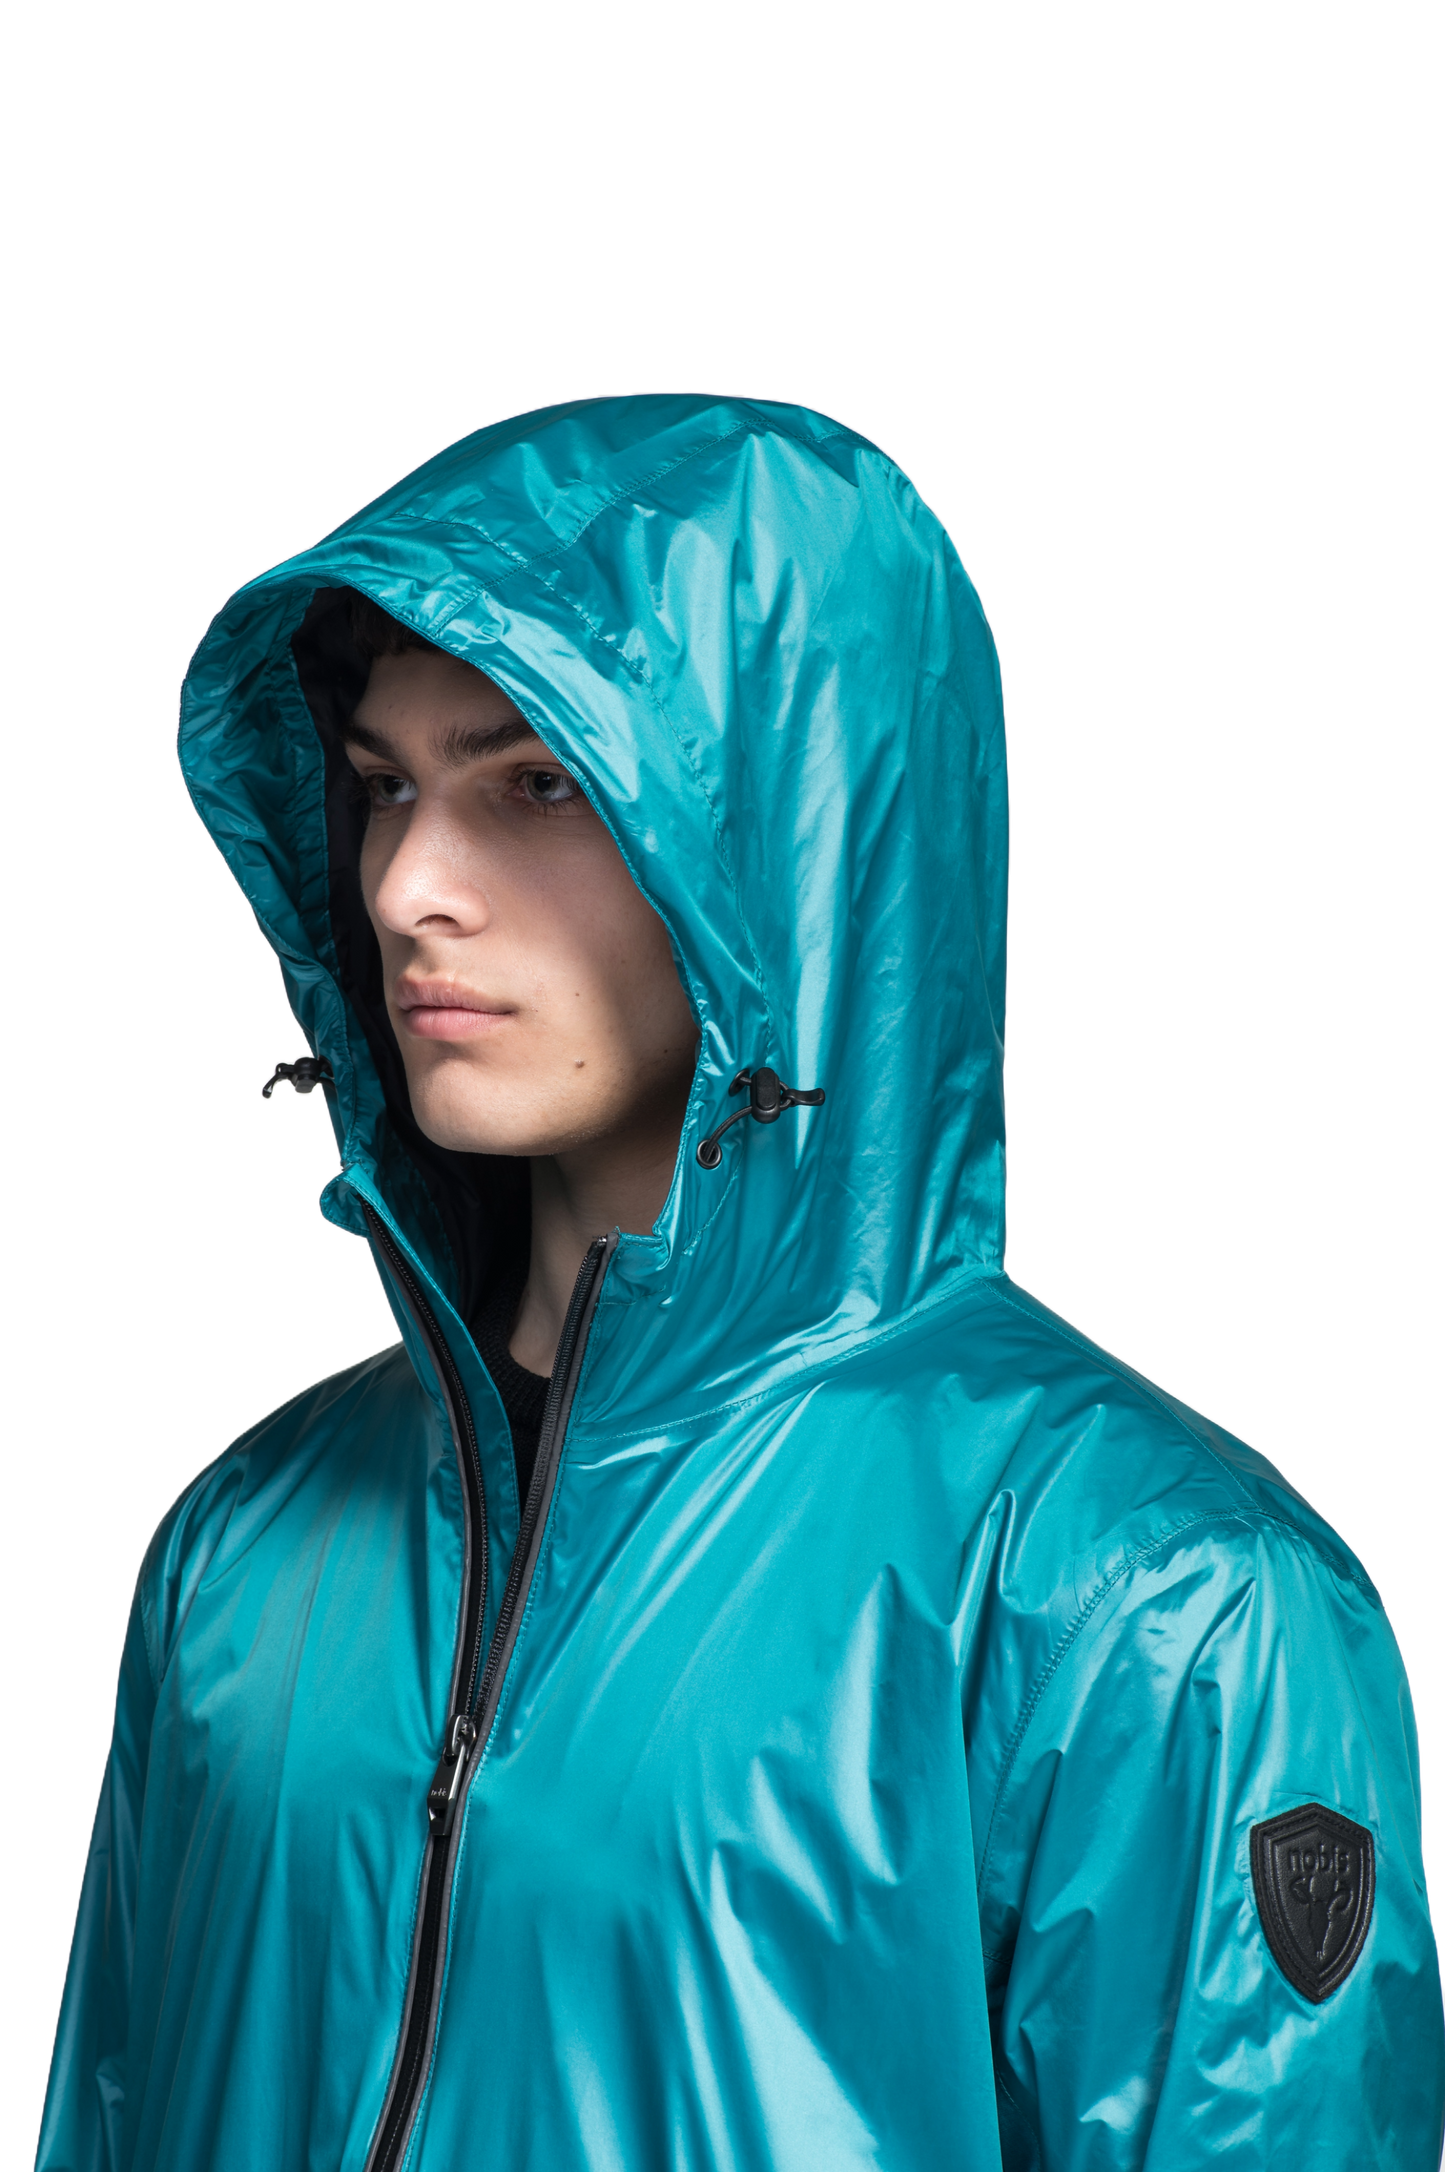 Stratus Men's Tailored Packable Rain Jacket in hip length, premium cire technical nylon taffeta and stretch ripstop fabrication, highly breathable mesh lining, hidden packable pocket, non-removable hood with adjustable draw cord, reflective piping along front and back, underarm grommets for extra breathability, back yoke with mesh ventilation, two waist zipper pockets, two interior zipper pockets, elastic cuffs with adjustable snap button, and adjustable interior draw cord at waist hem, in Deep Lake